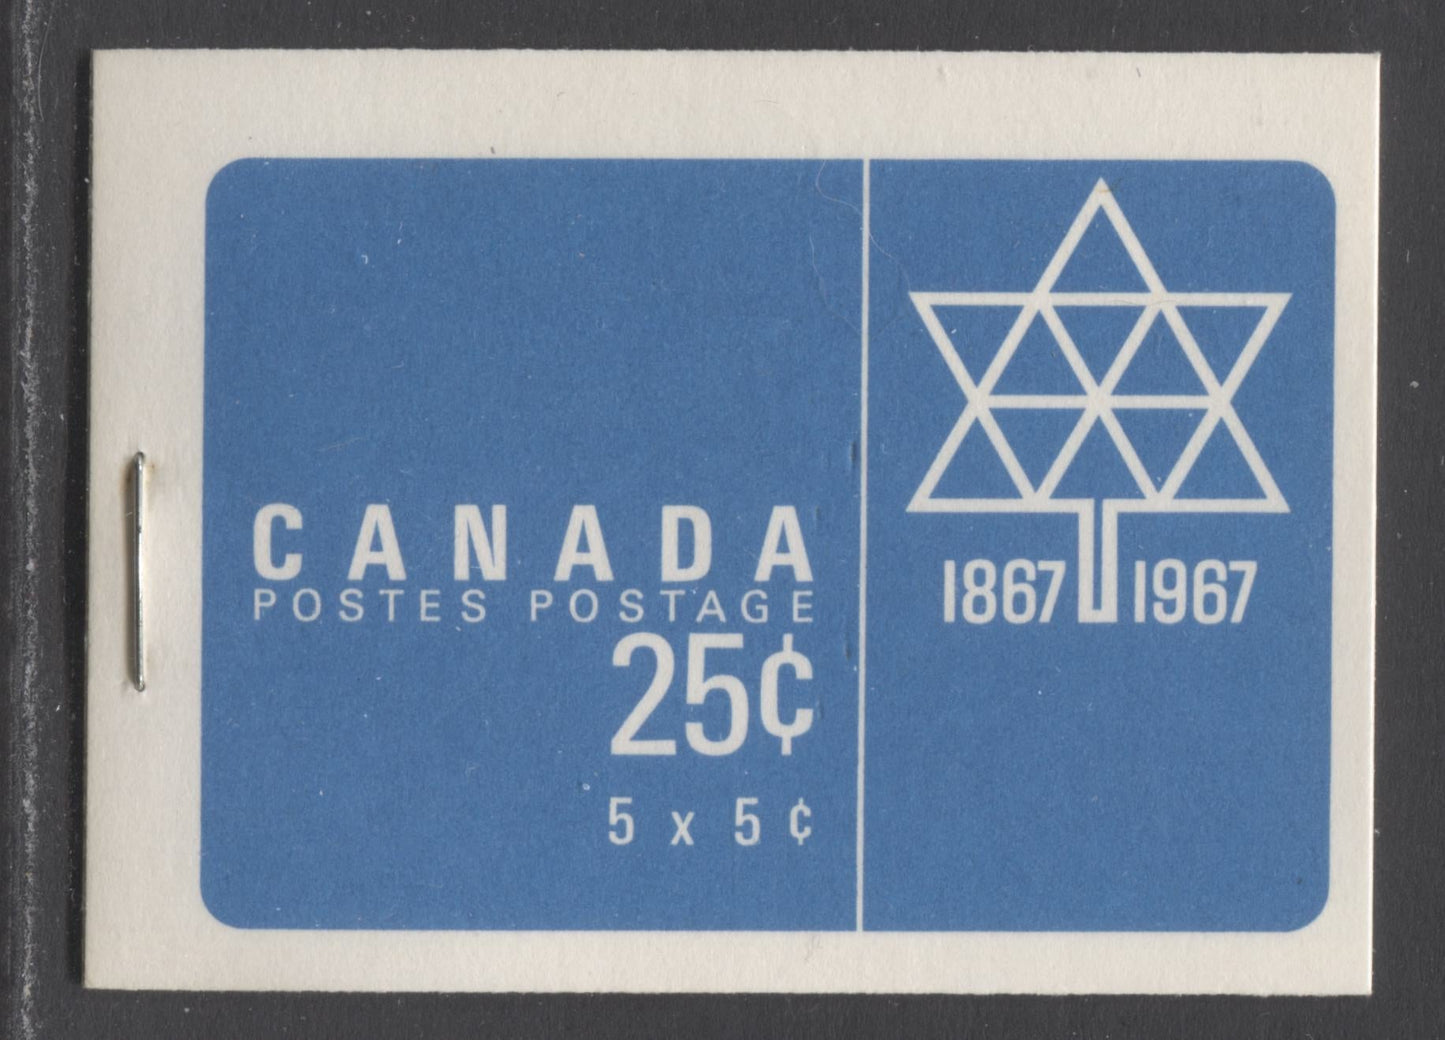 Lot 228 Canada #BK52evar 1962-1967 Cameo Issue, a VFNH Booklet Containing A 5c Pane of 5 + Label, Centennial Cover, LF Pane, HB Interleaving, 12.5mm Staple